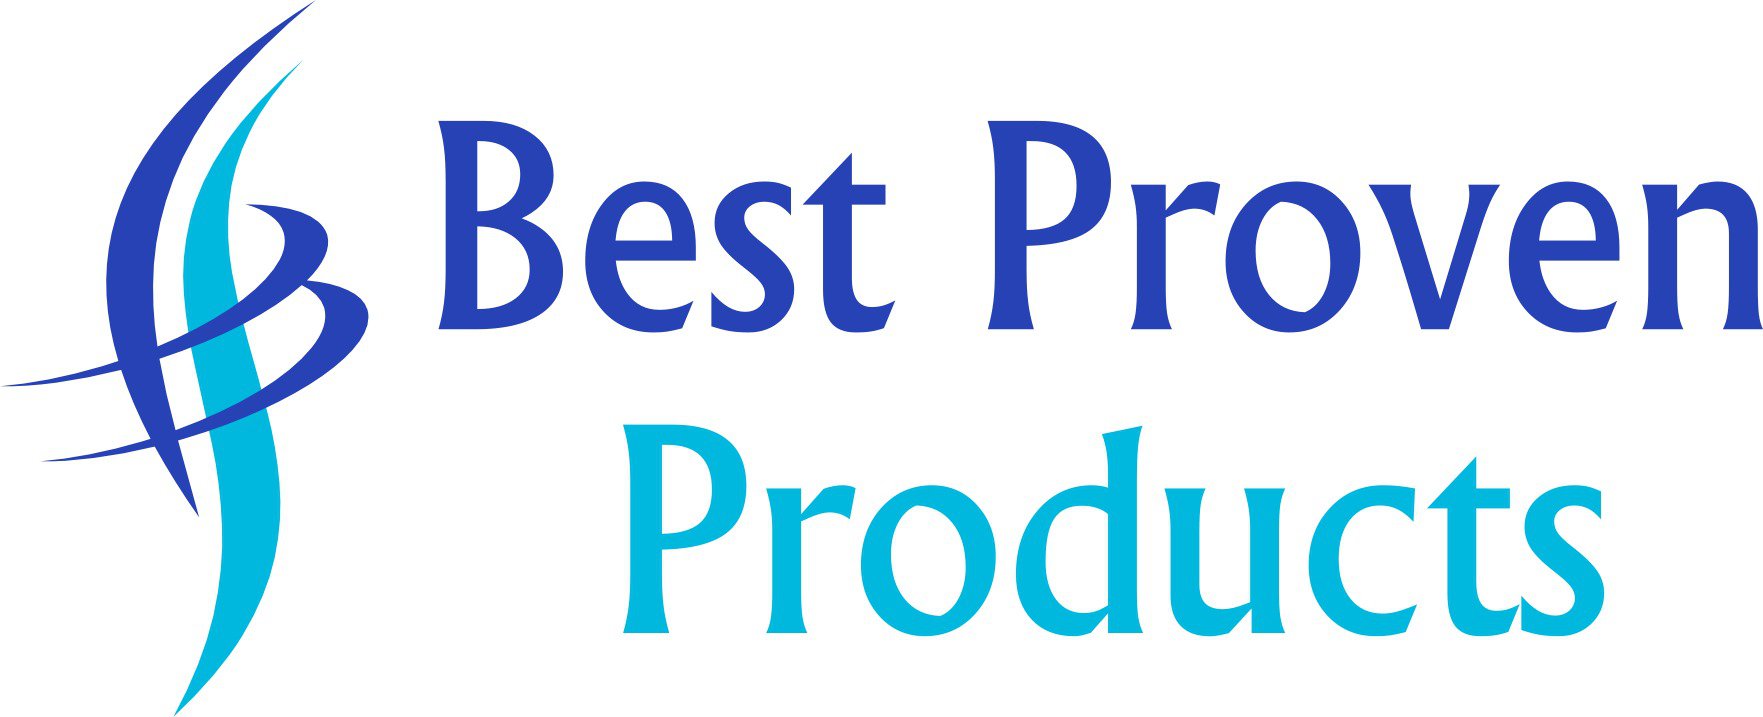 Best Proven Products